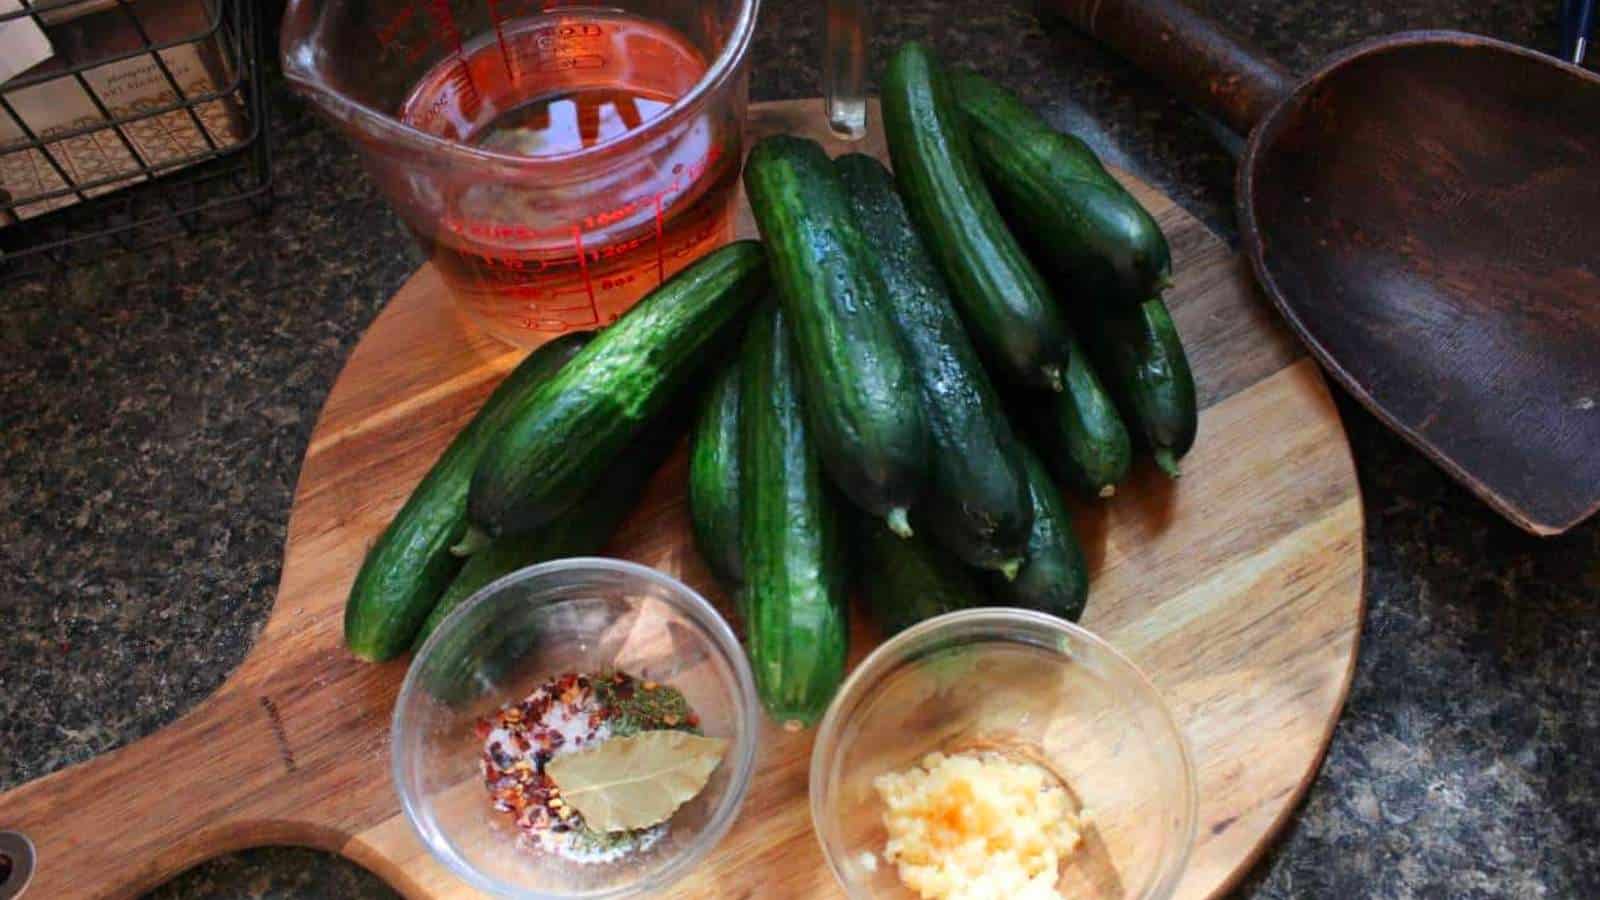 Ingedients for garlic dill pickles on a wooden cutting board.